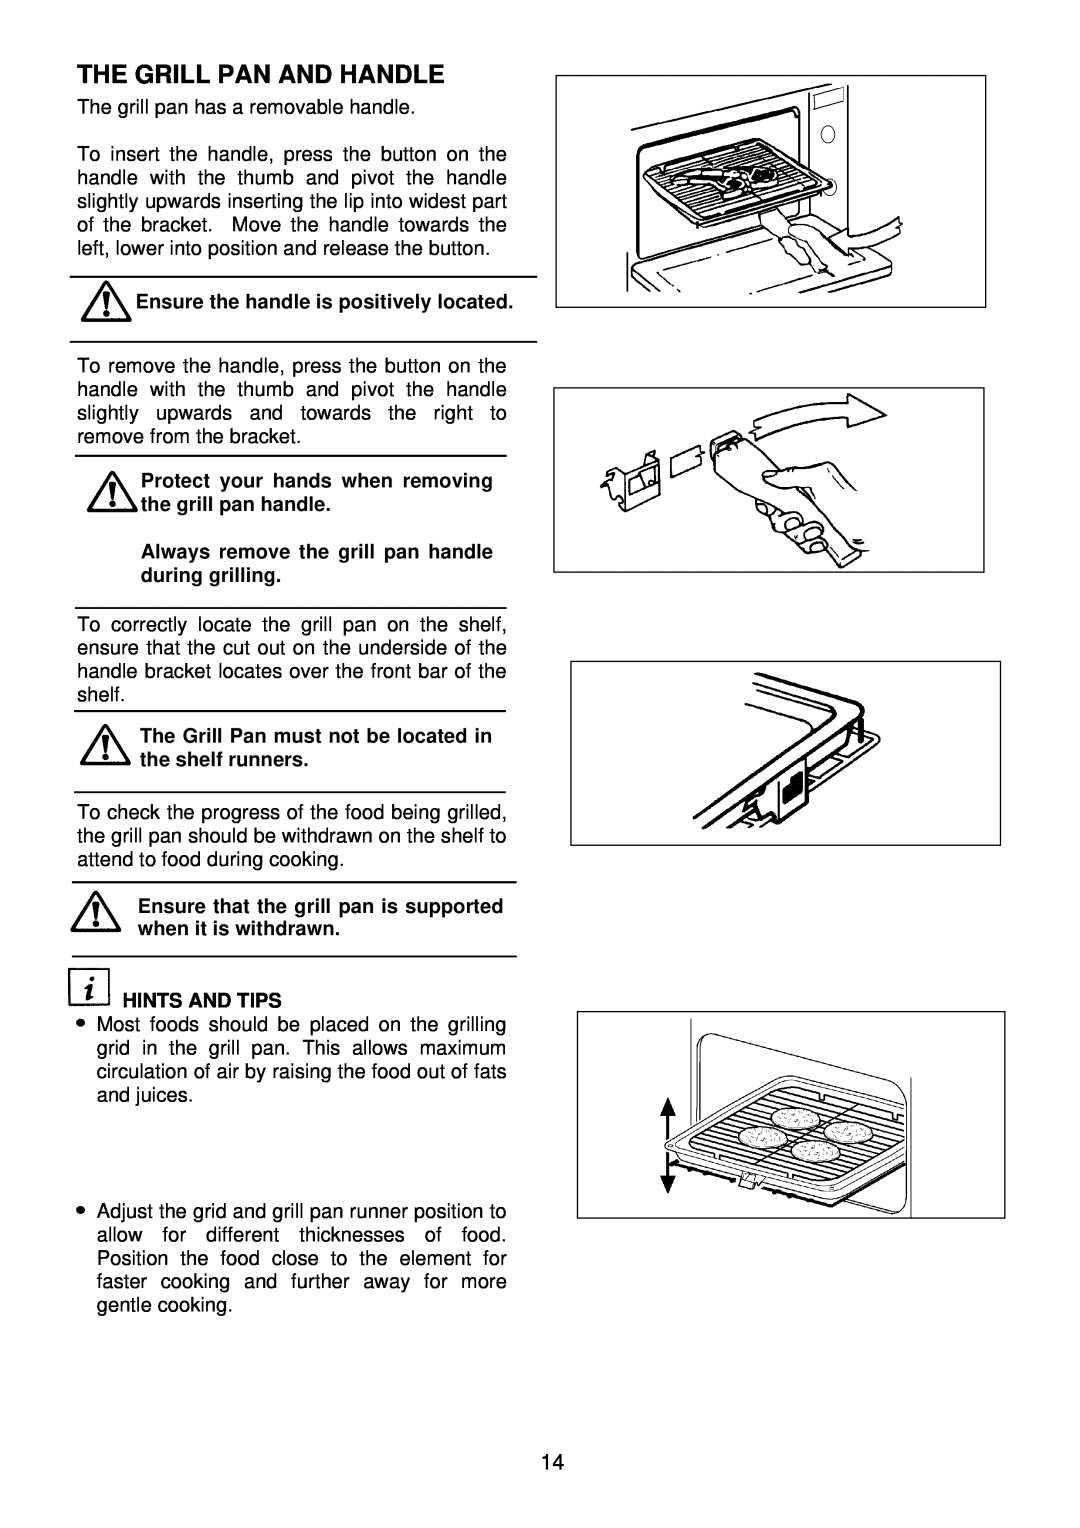 Electrolux EDB705 manual The Grill Pan And Handle, Ensure the handle is positively located, Hints And Tips 